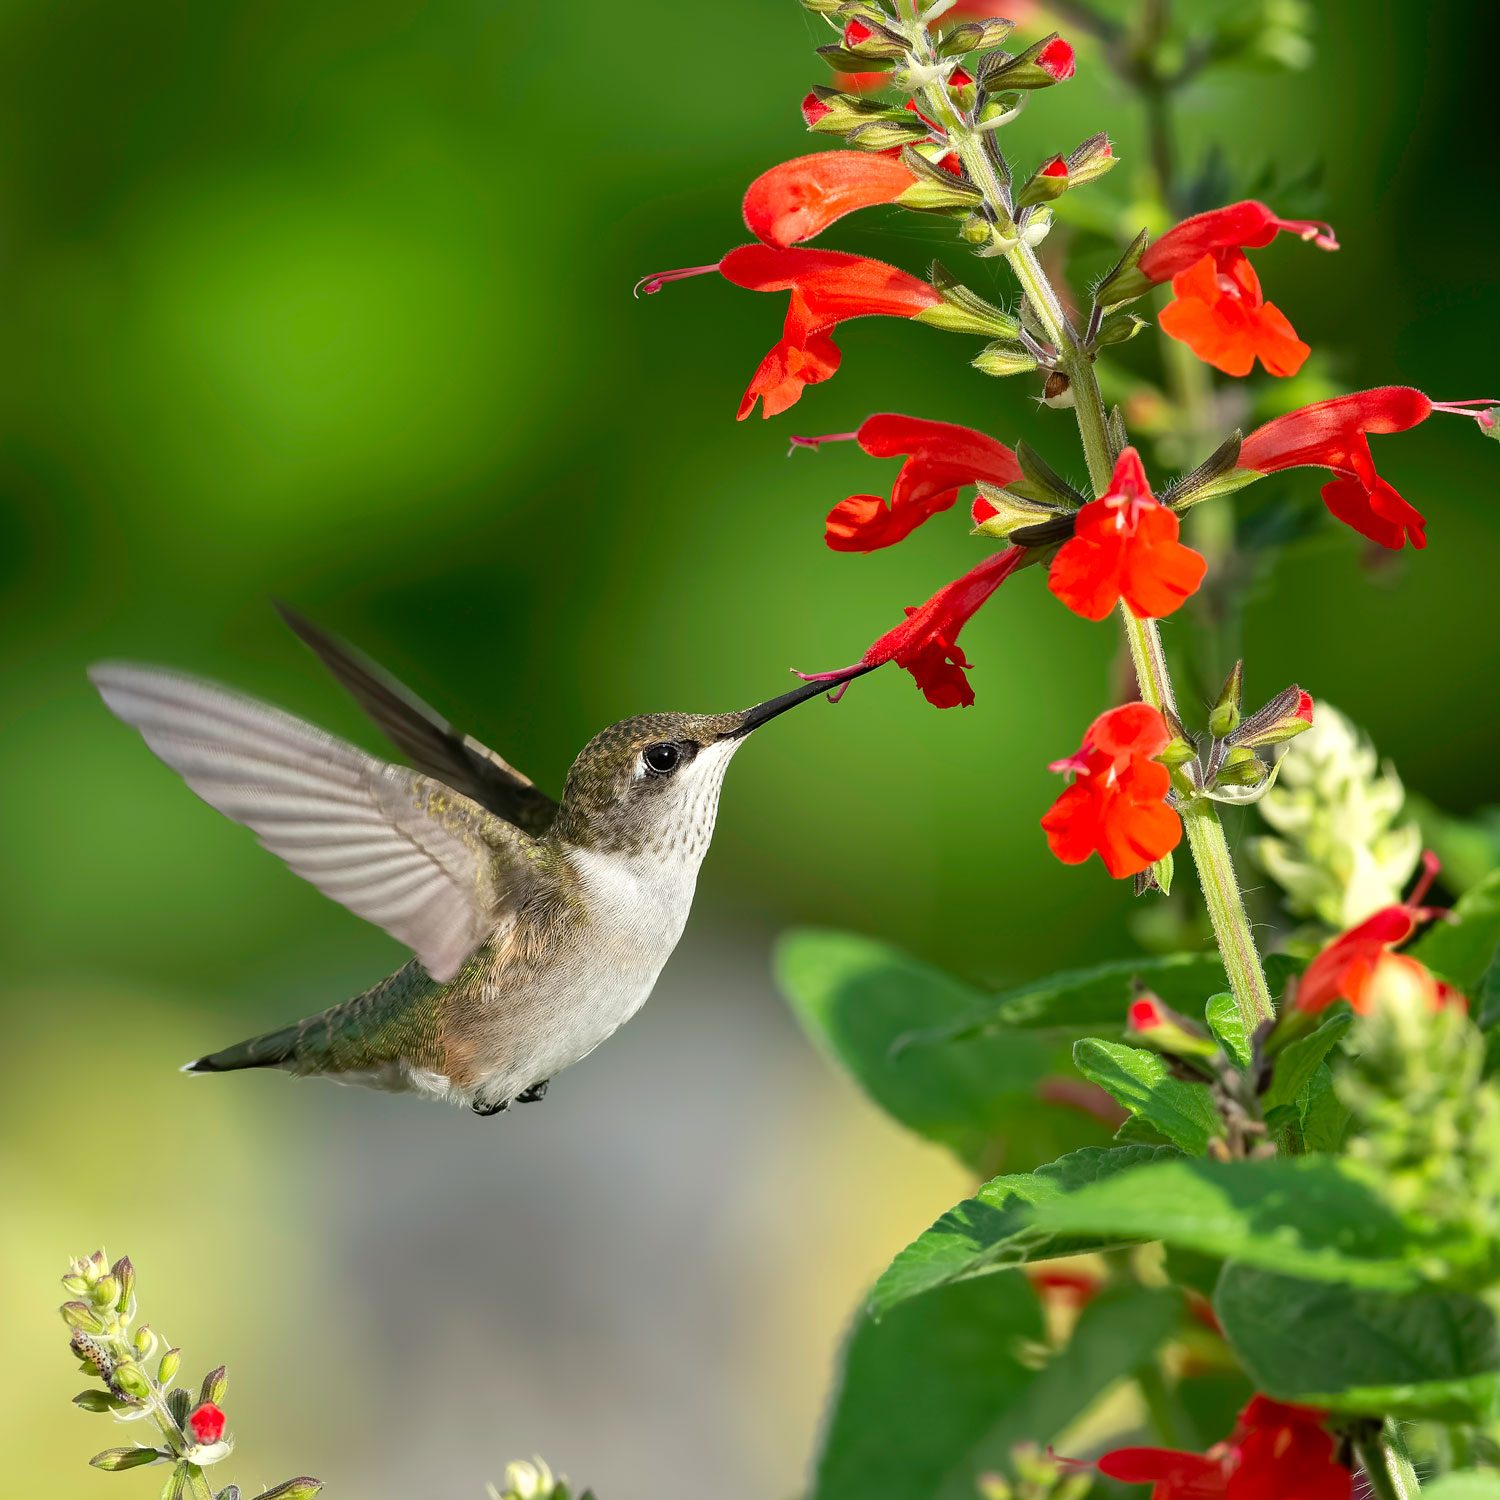 What Plants Do Hummingbirds Love Most?